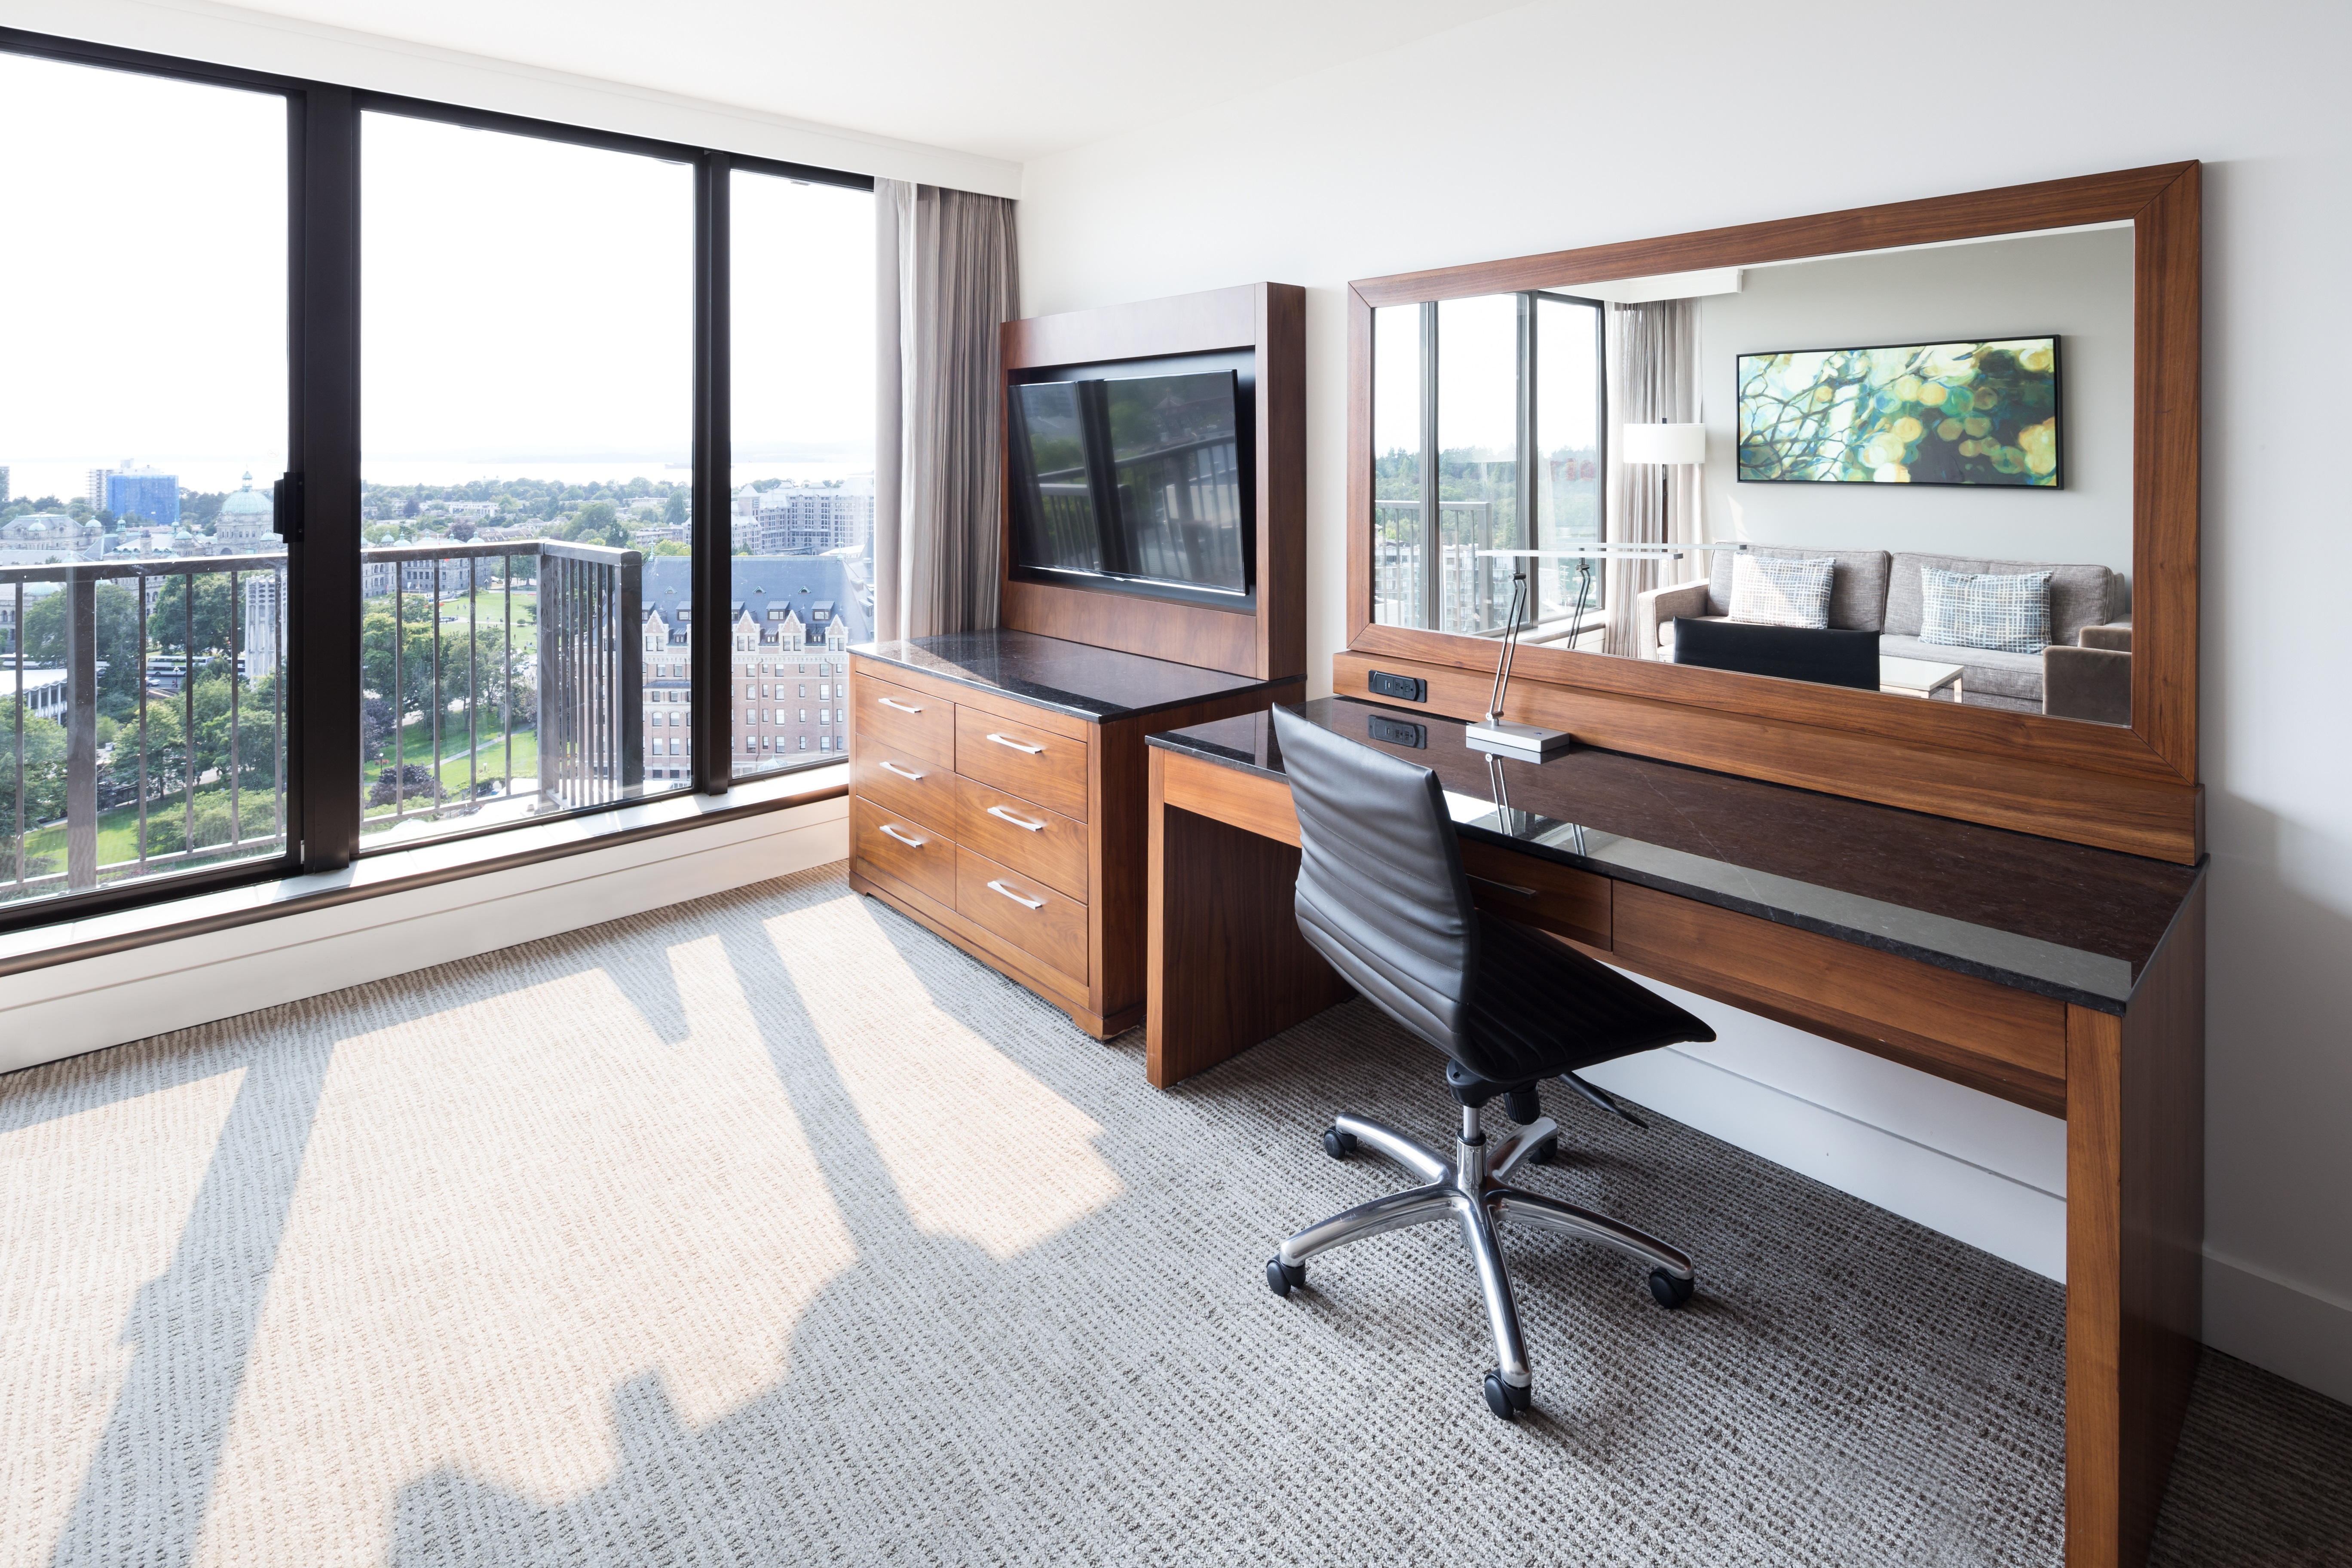 Desk, Wall Mounted Mirror, Rolling Chair, TV, Credenza by Window Balcony Overlooking the City in a Suite Room